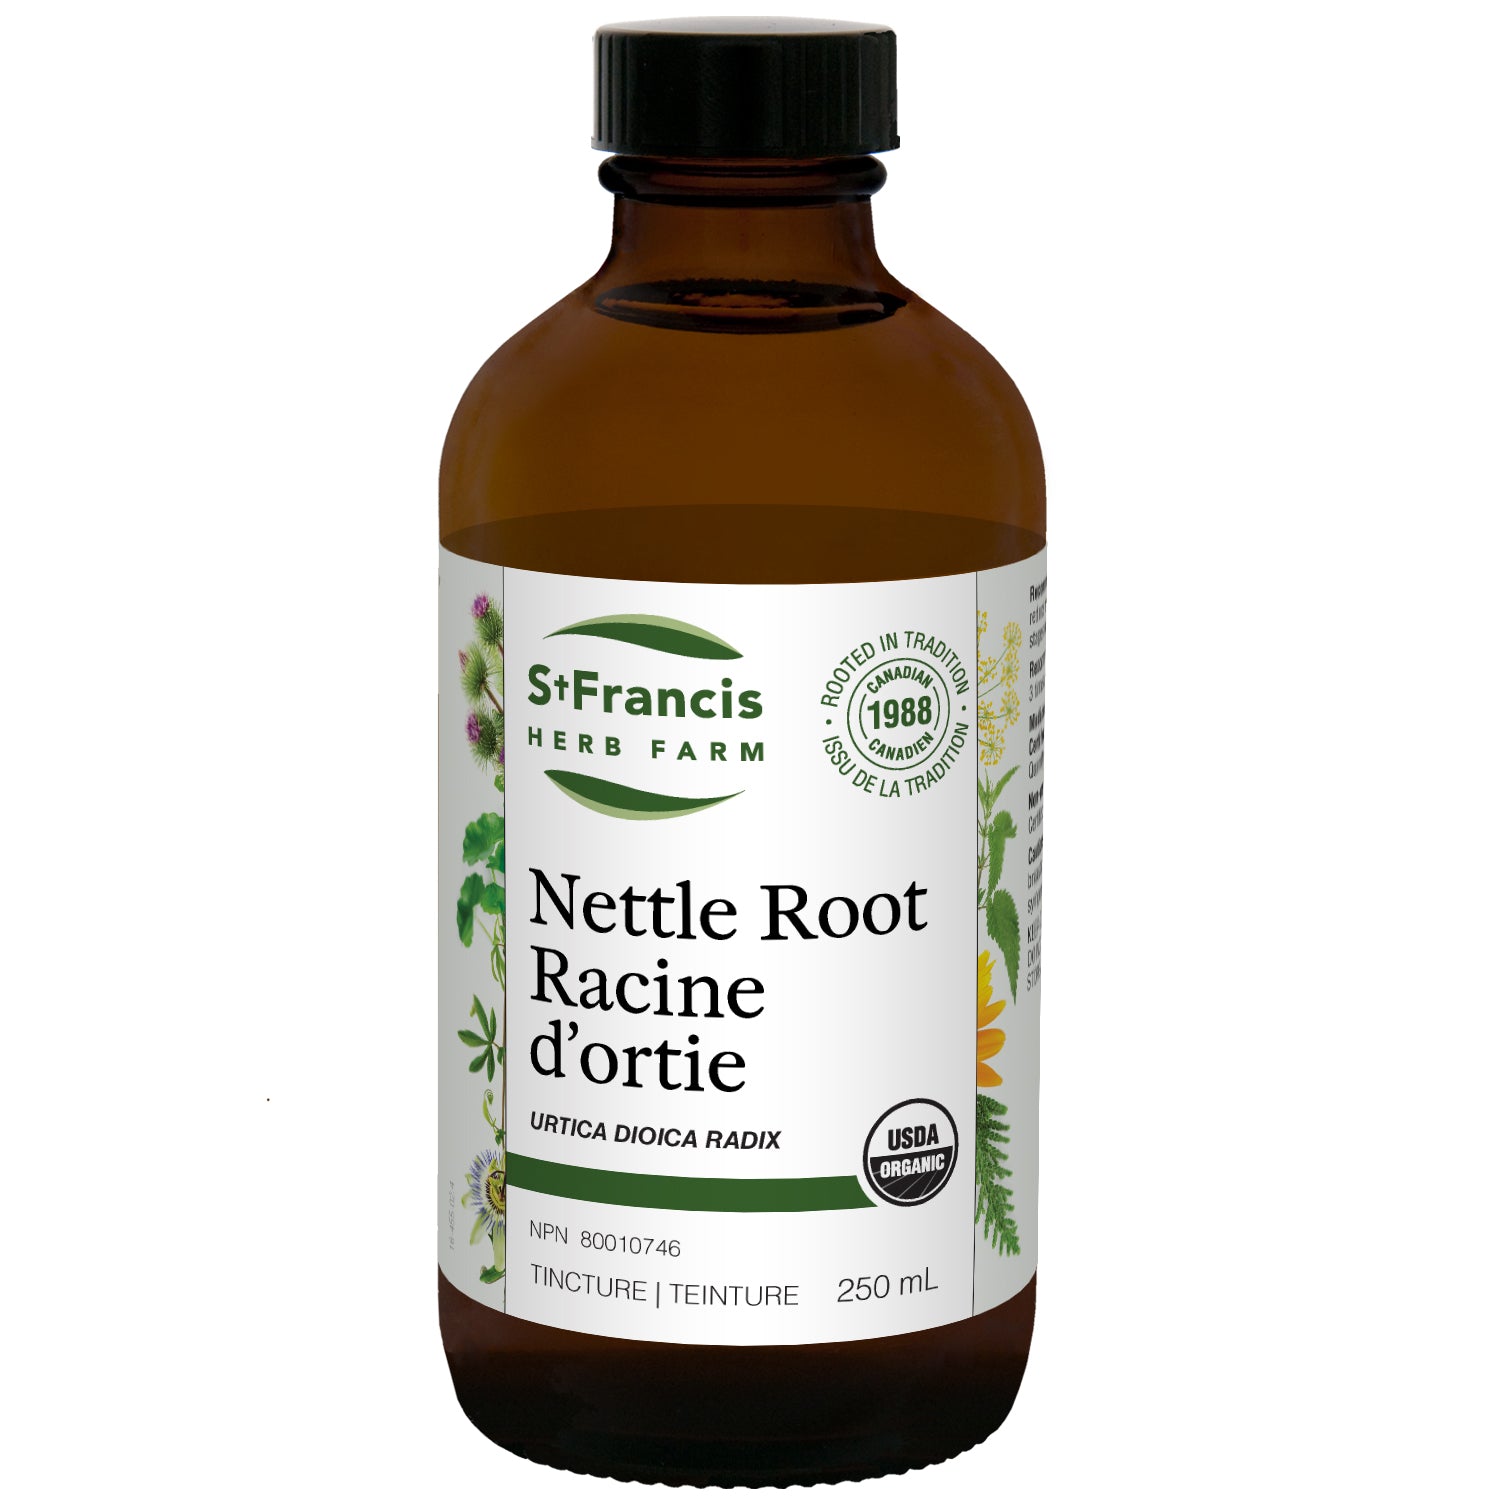 St. Francis Nettle Root Tincture 250mL